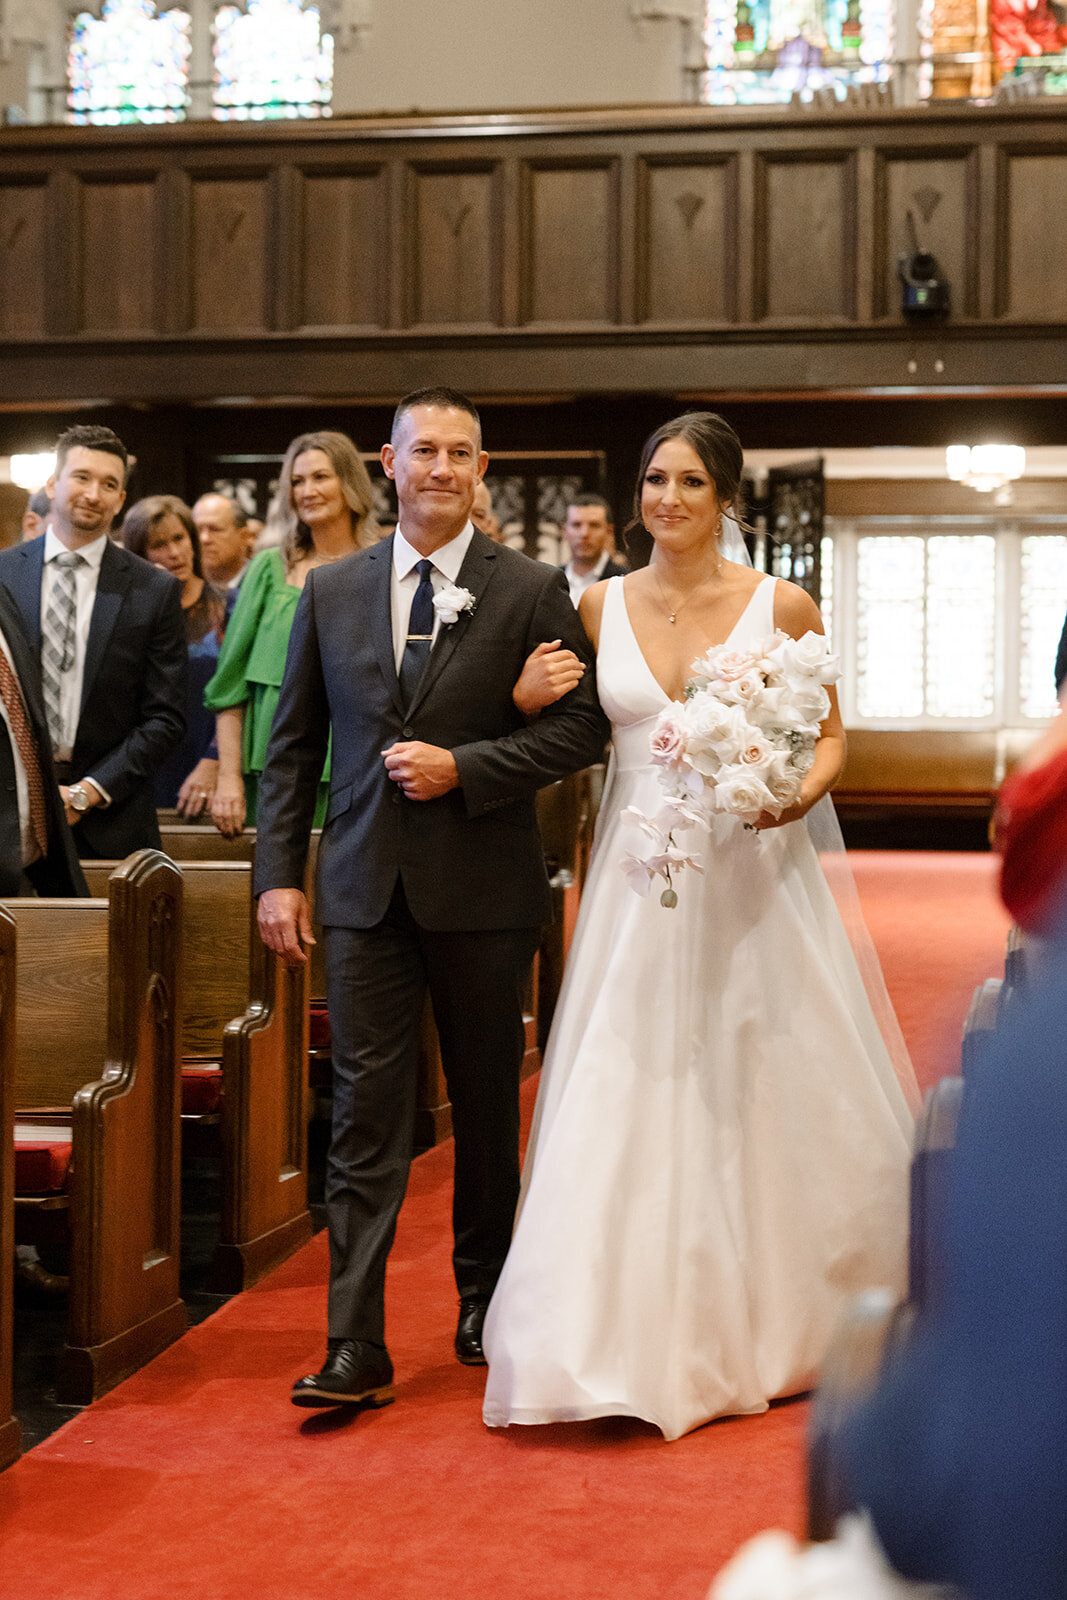 Kylie and Jack at The Grand Hall - Kansas City Wedding Photograpy - Nick and Lexie Photo Film-633